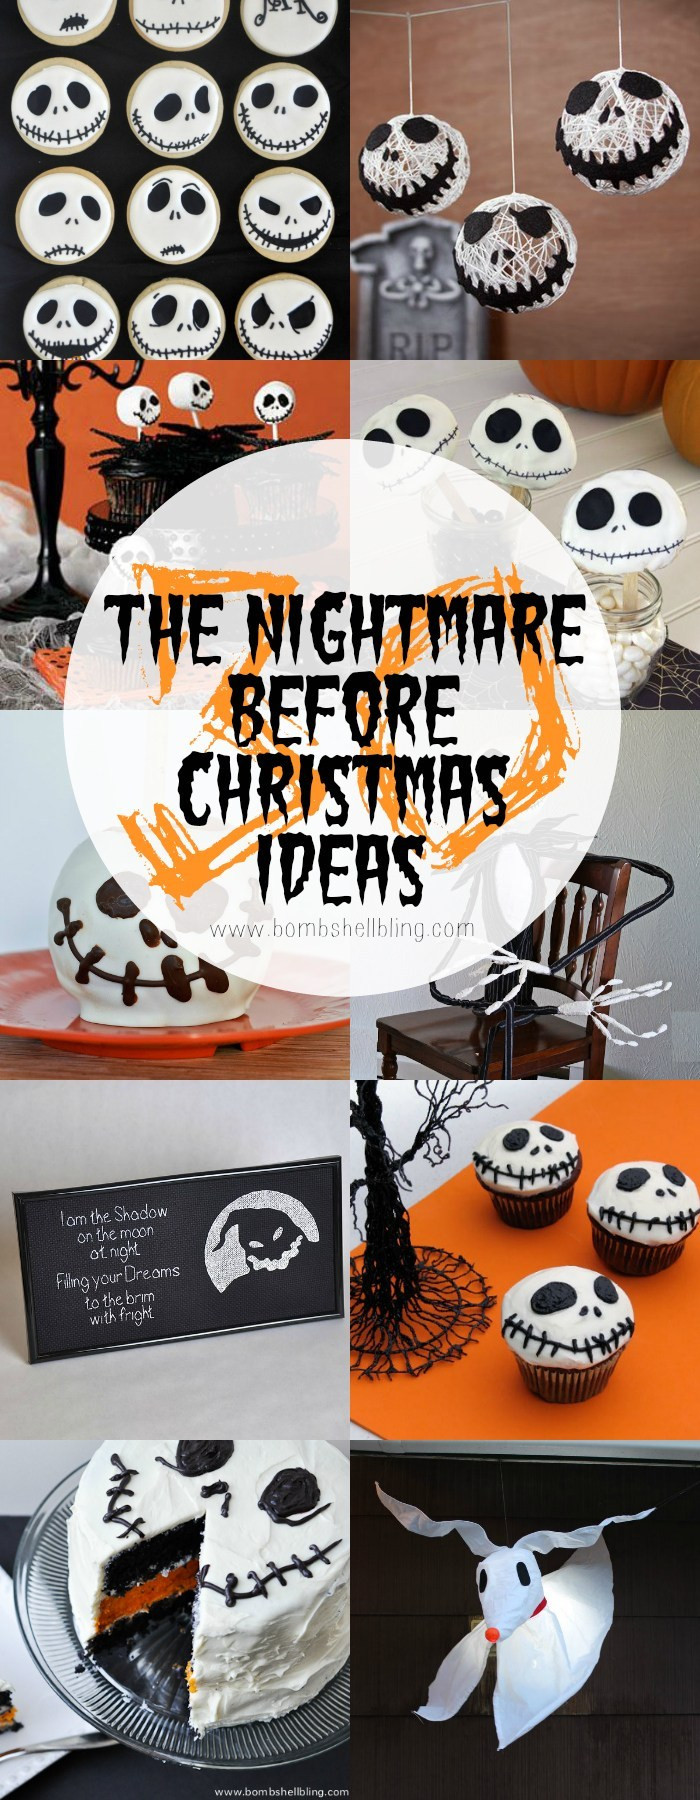 The Nightmare Before Christmas Party Ideas
 FREE The Nightmare Before Christmas Printable